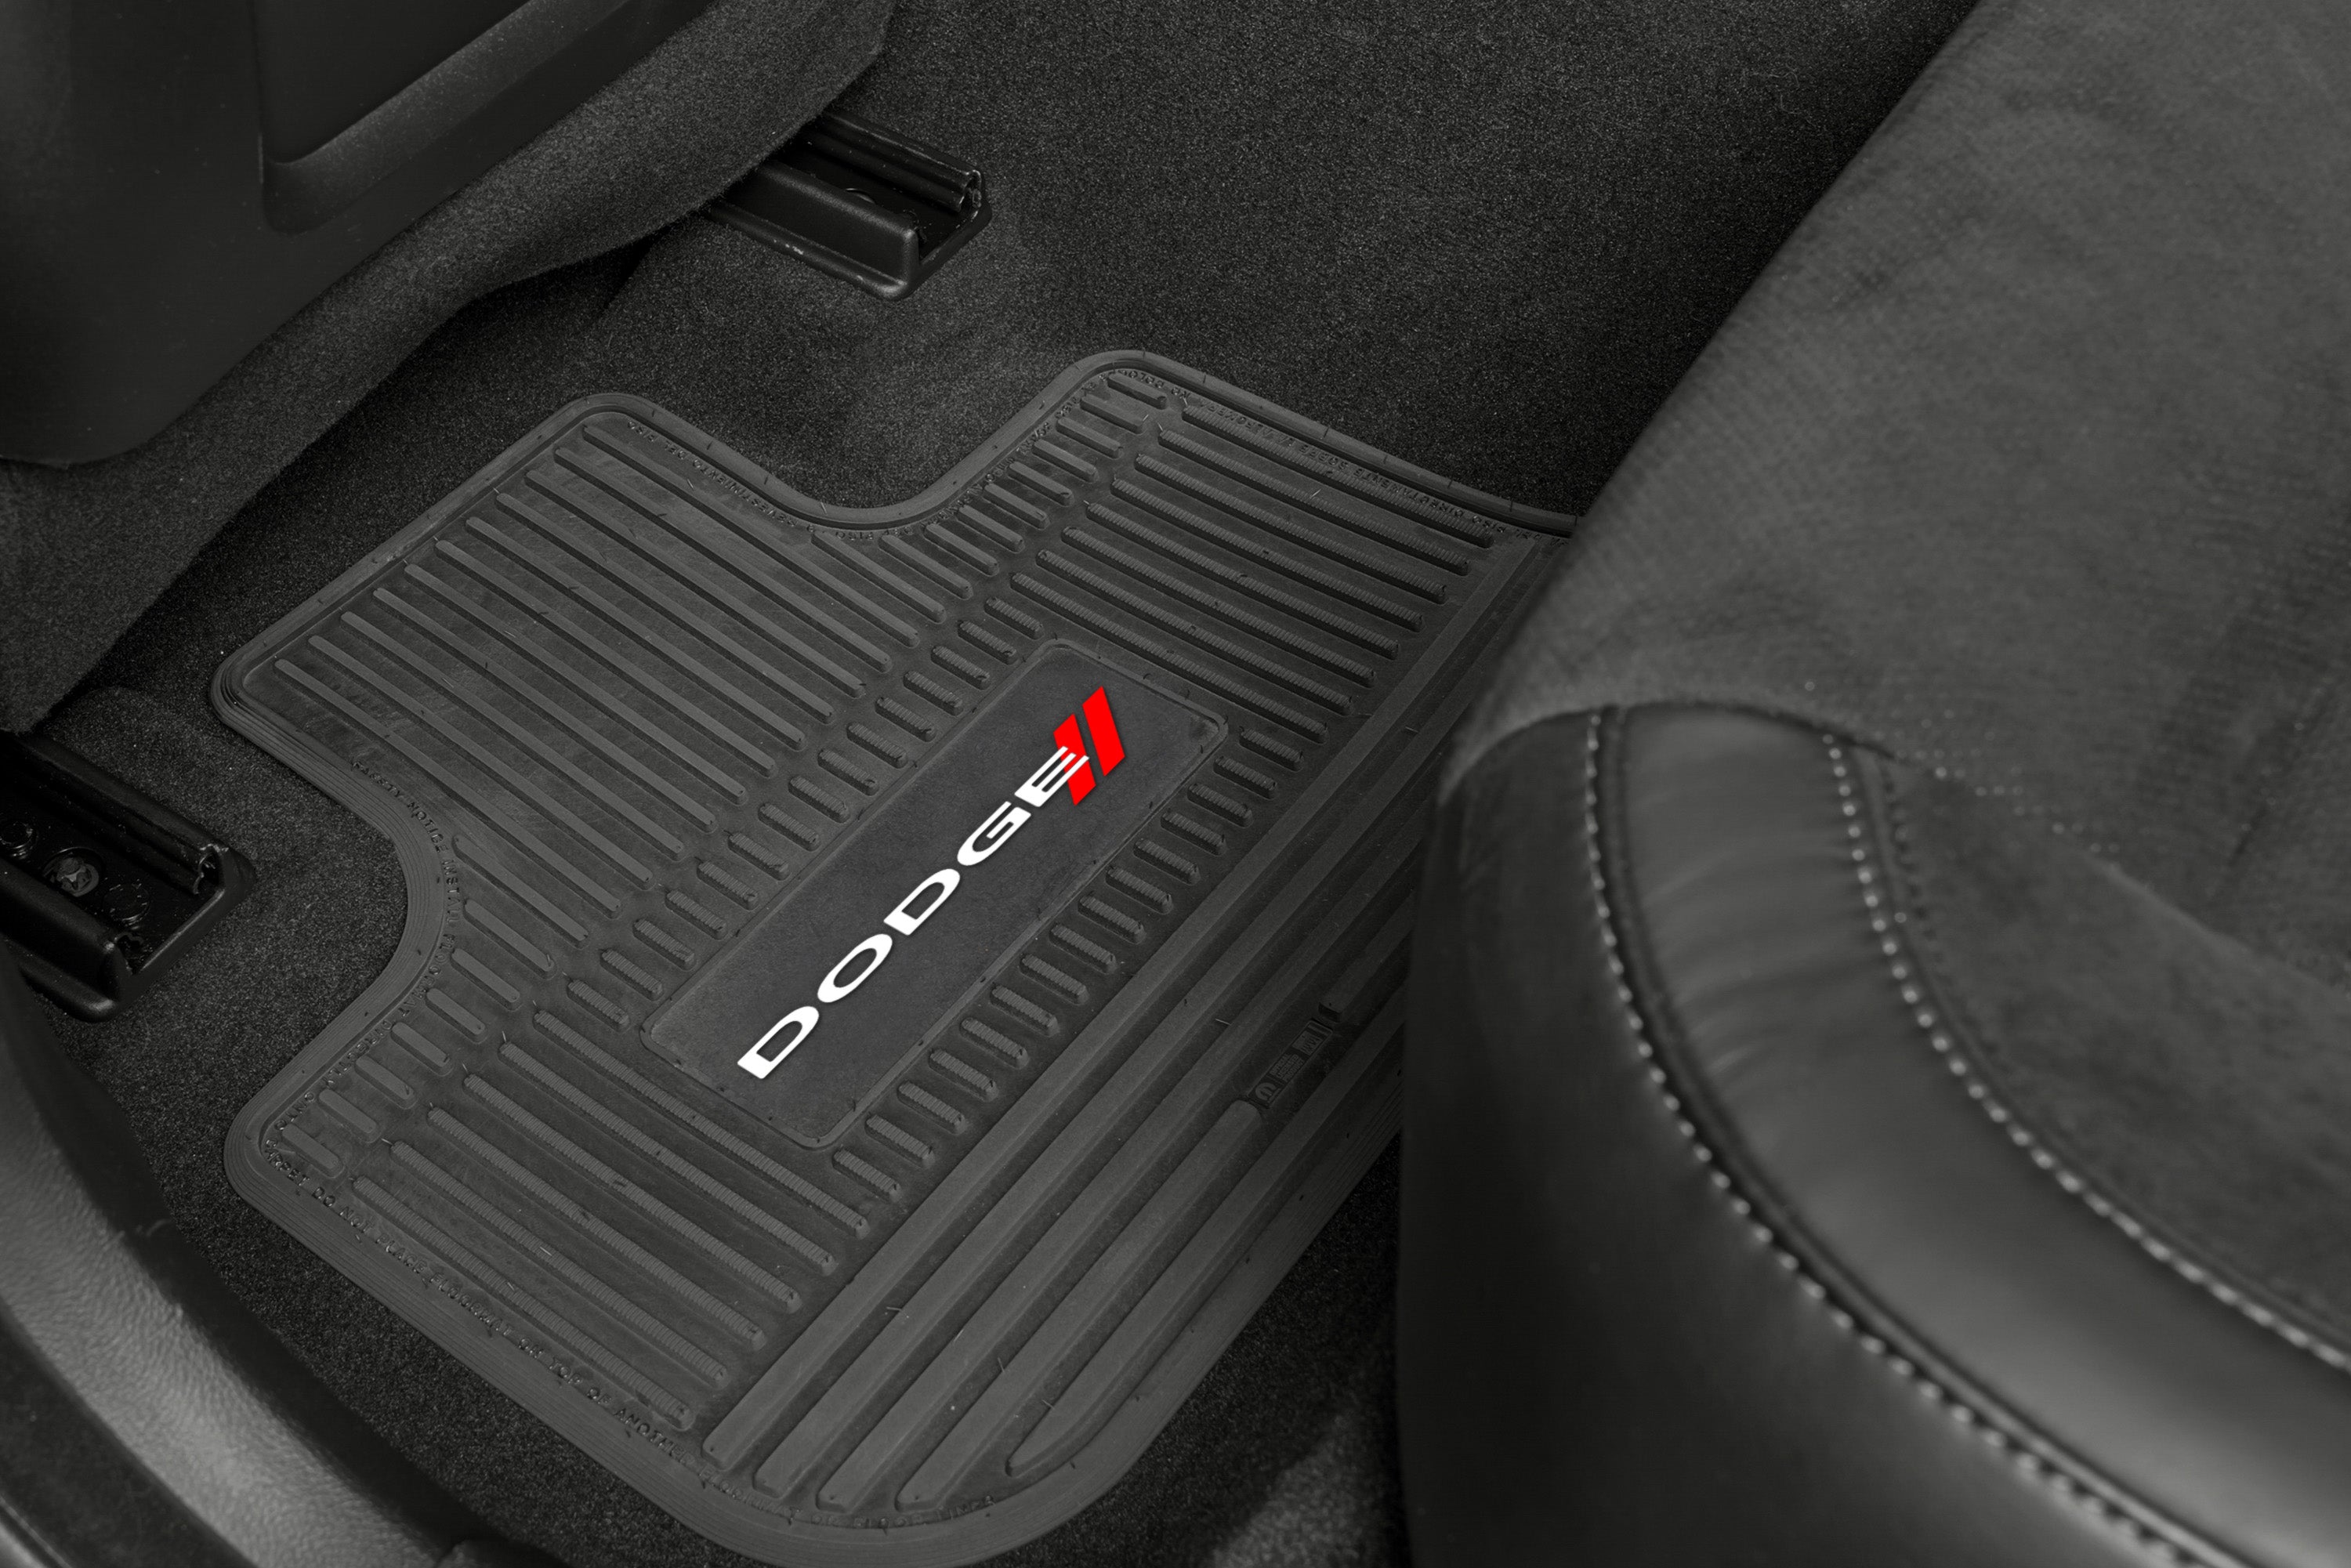 Charger Floor Mats 11-24 Dodge Charger RWD 4 Piece Custom Vintage Scene w/ Dodge w/ Stripe Insert - Black w/ White 'Dodge' and Red 'Stripes' Insert FlexTread